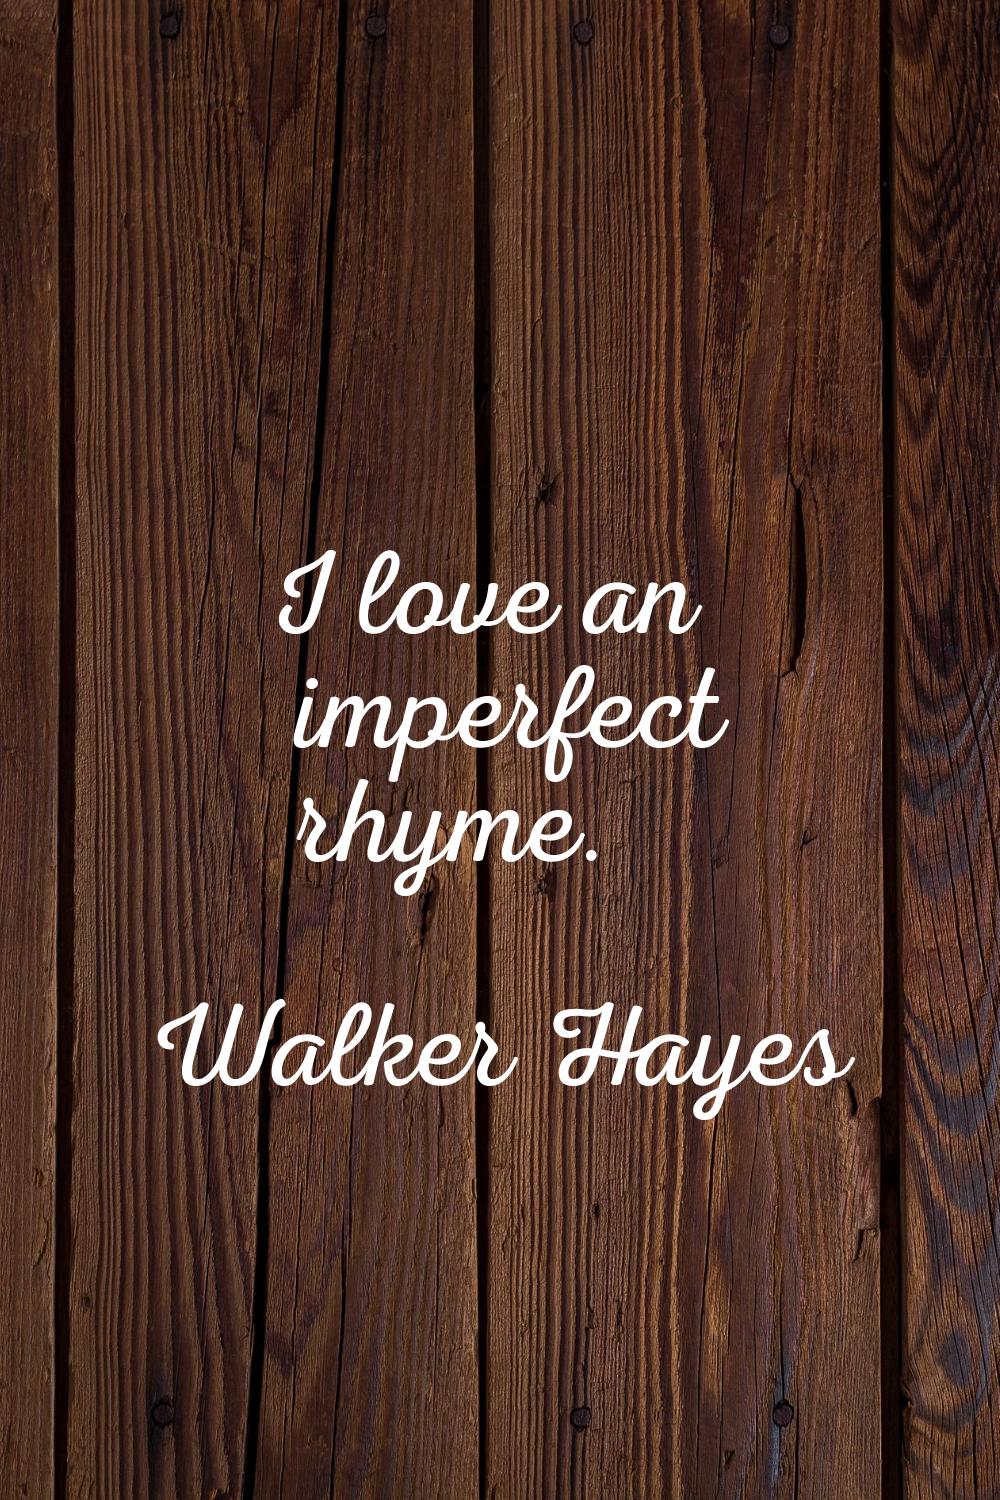 I love an imperfect rhyme.